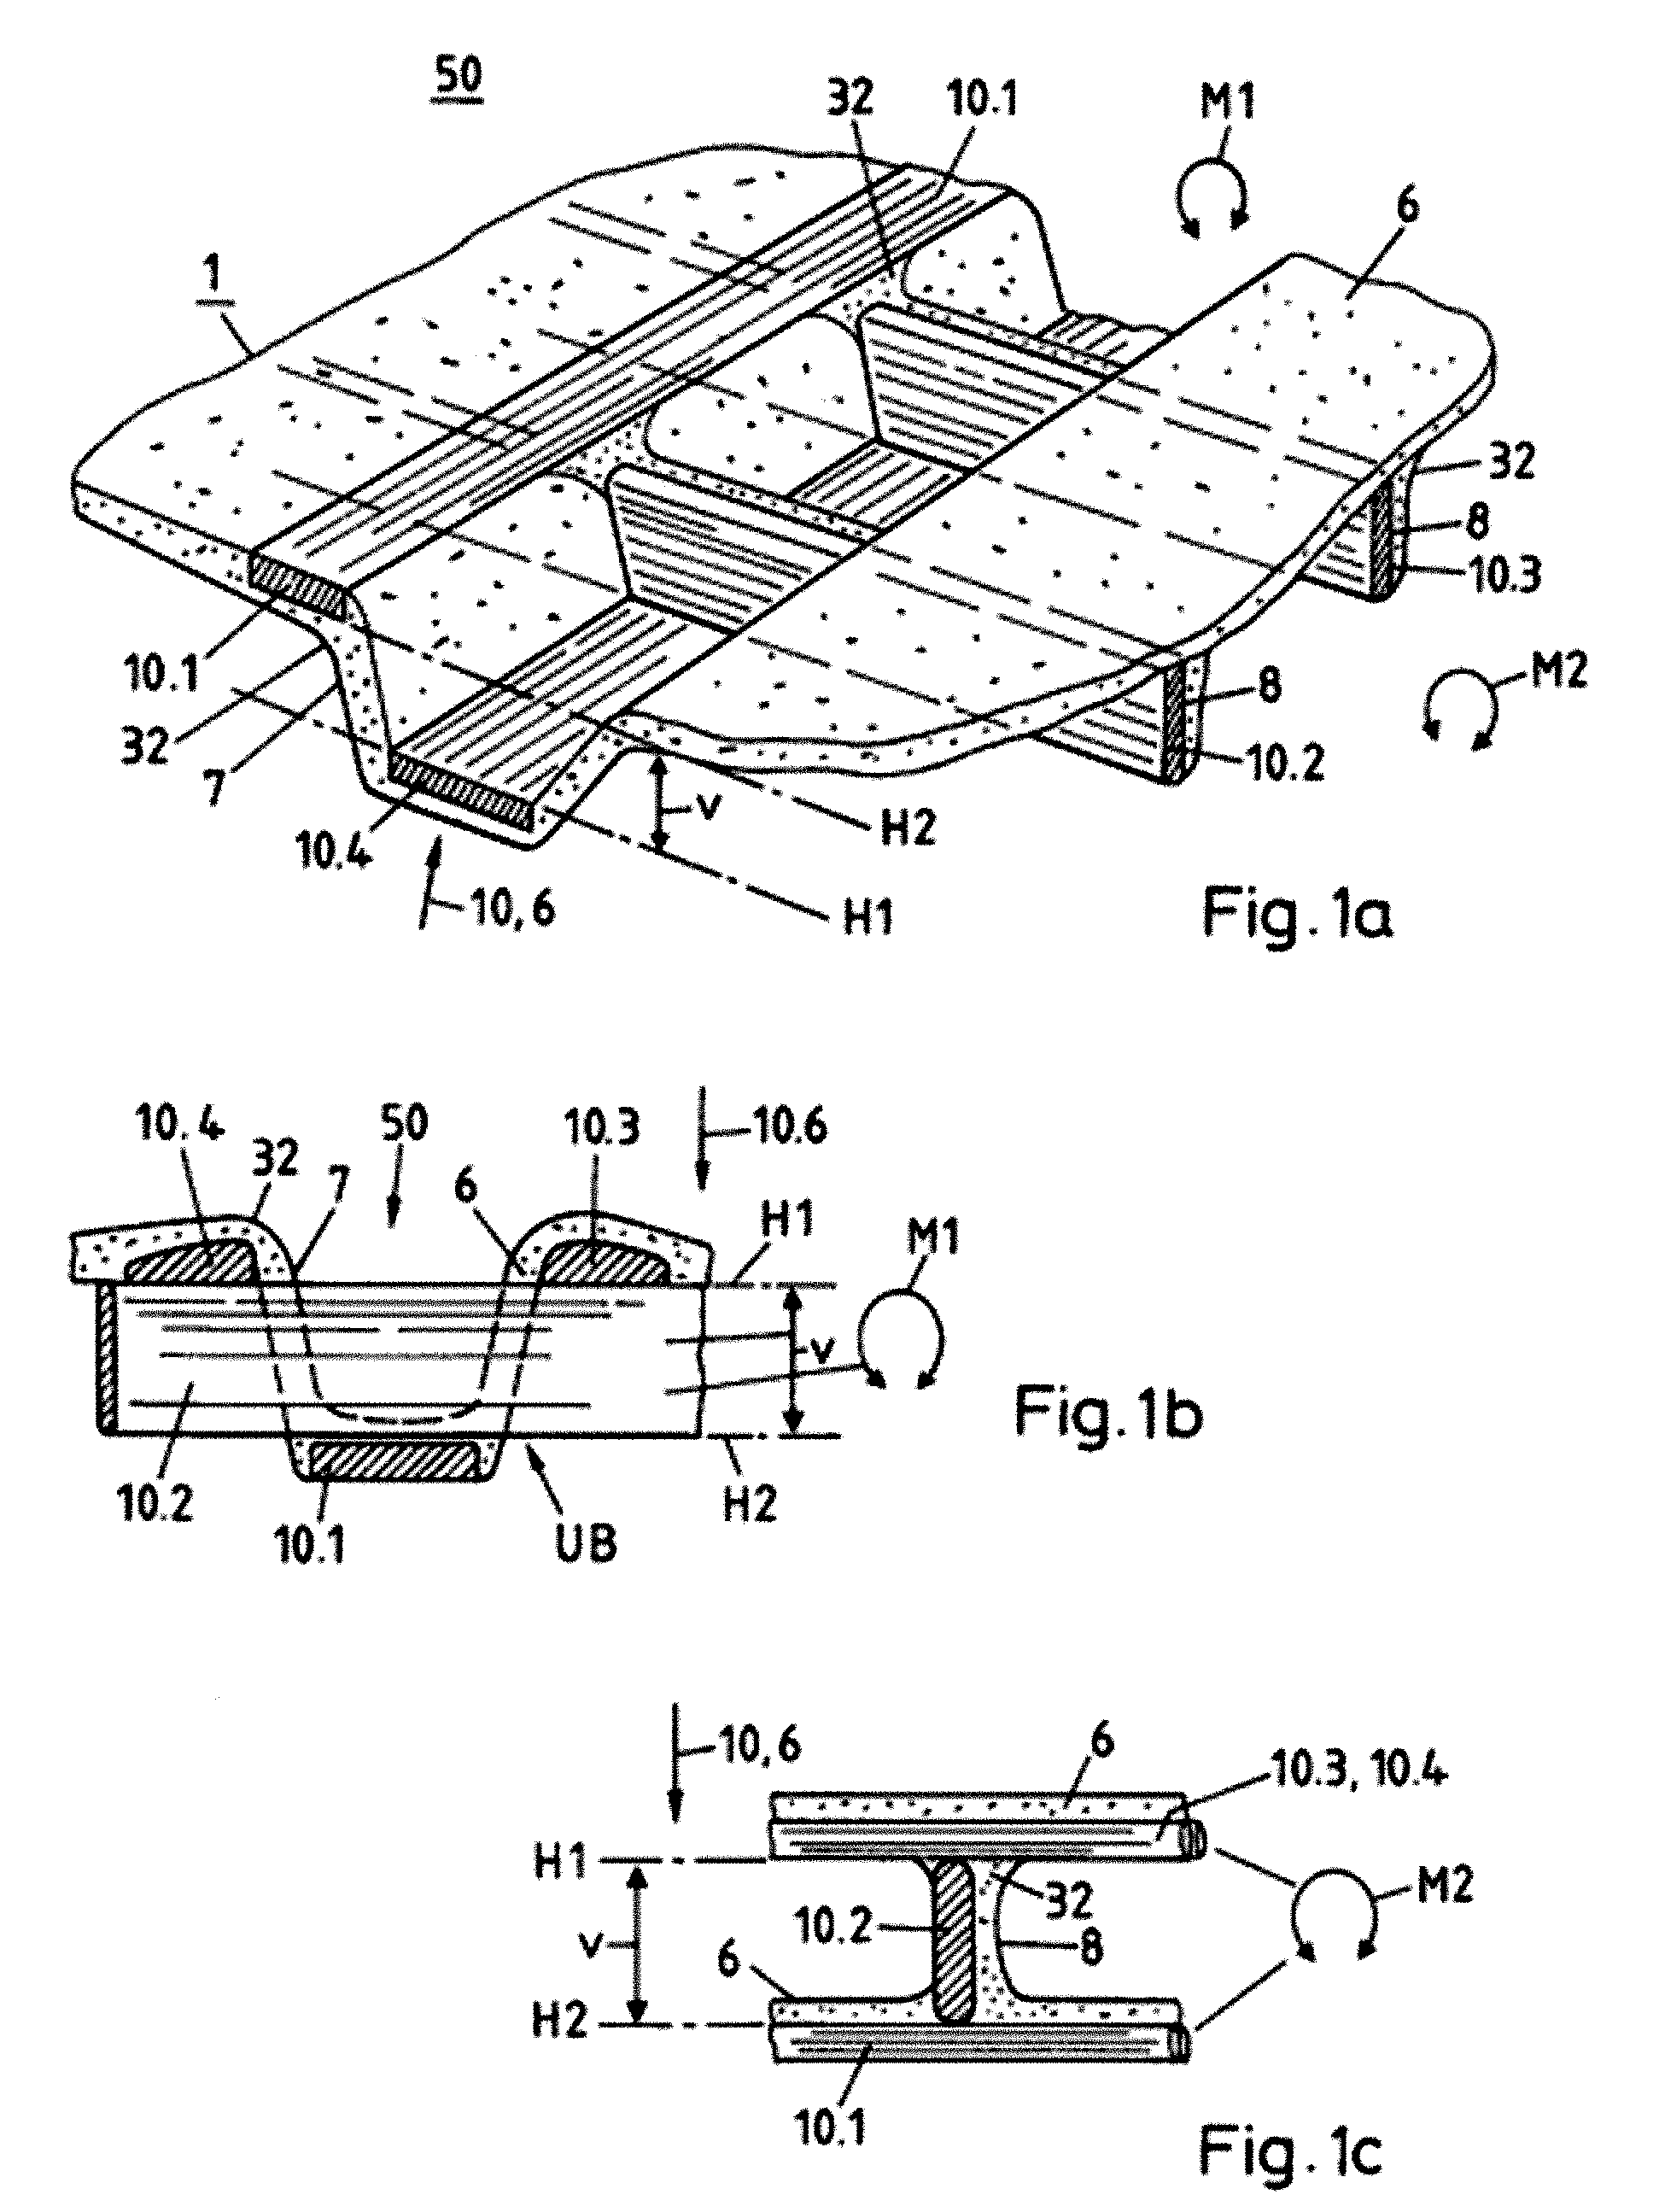 Structural Component Consisting of Fibre-Reinforced Thermoplastic